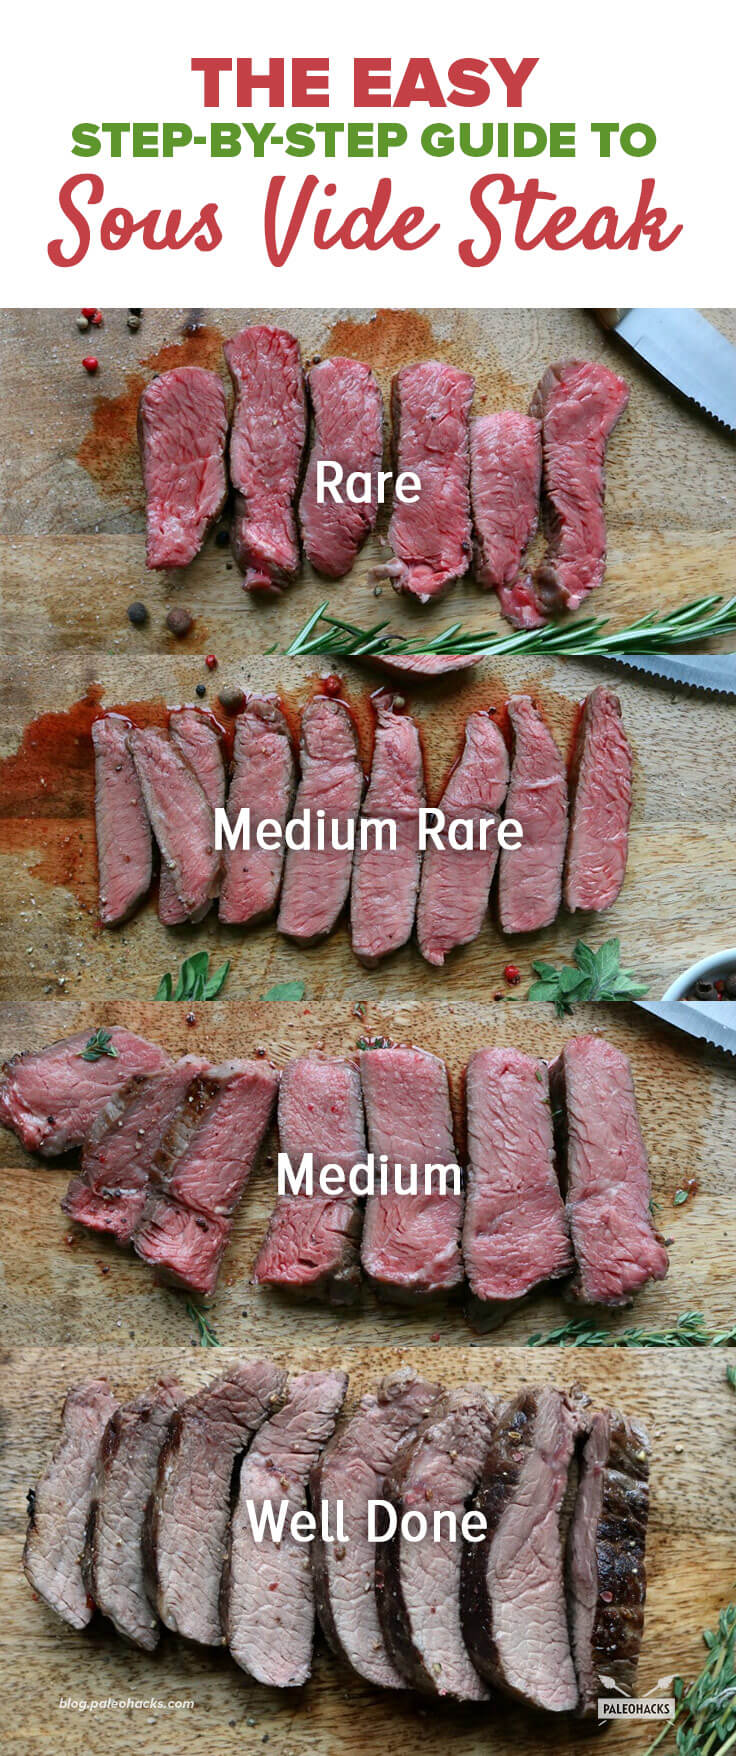 An easy step-by-step guide to cook your steak to the perfect temperature for uber-tender, restaurant-worthy steak!